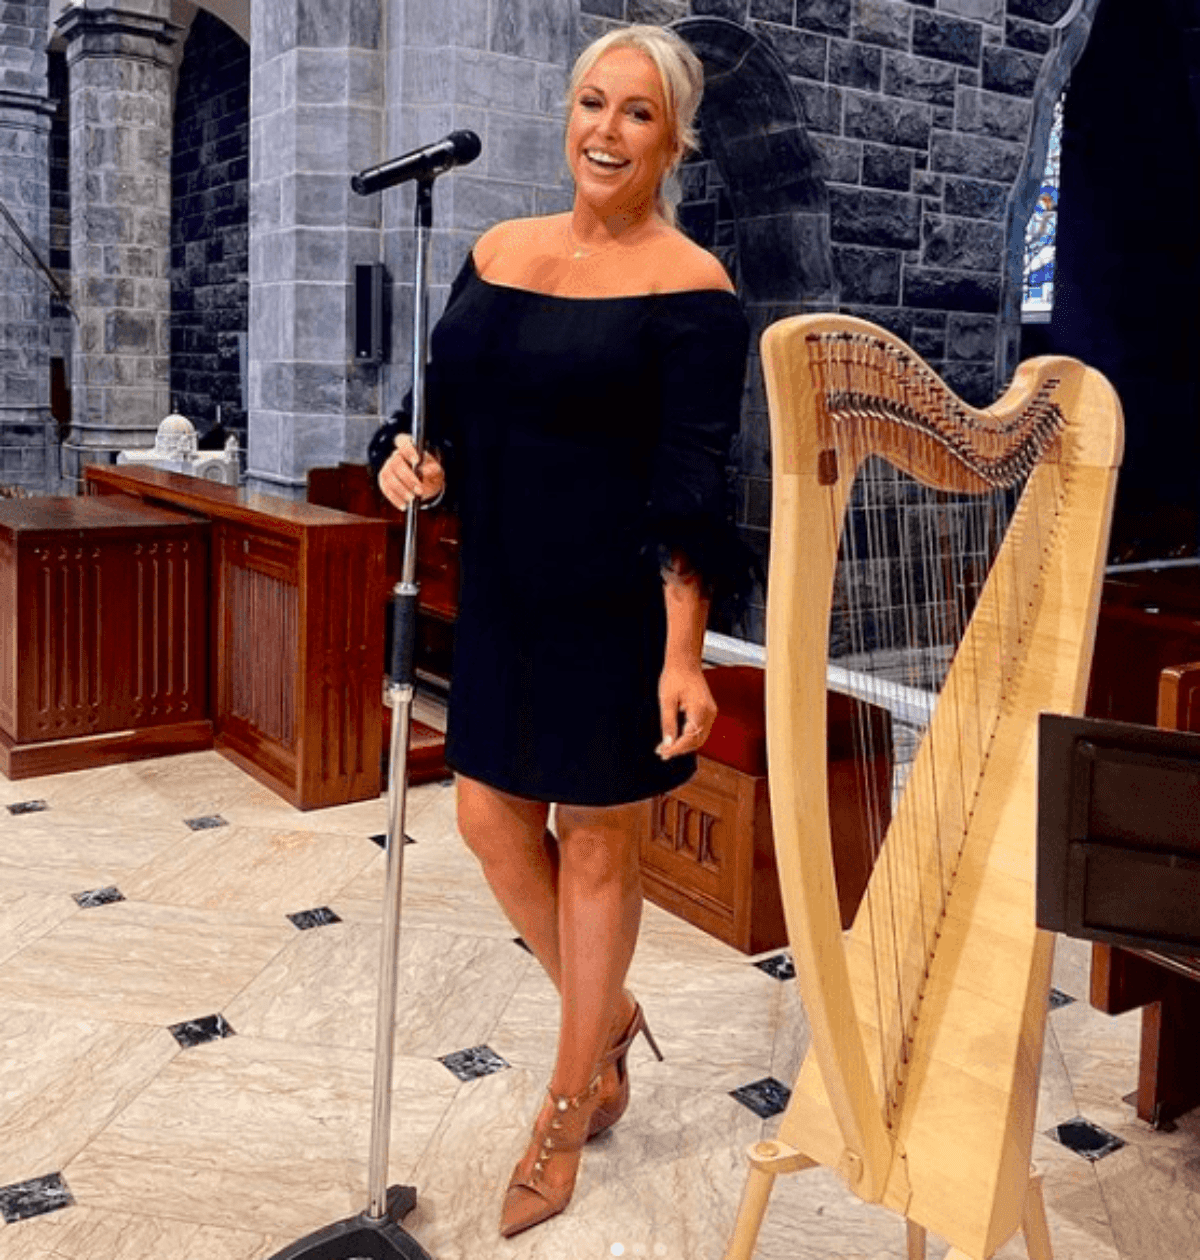 Sinead O'Brien launches Shapewear collection